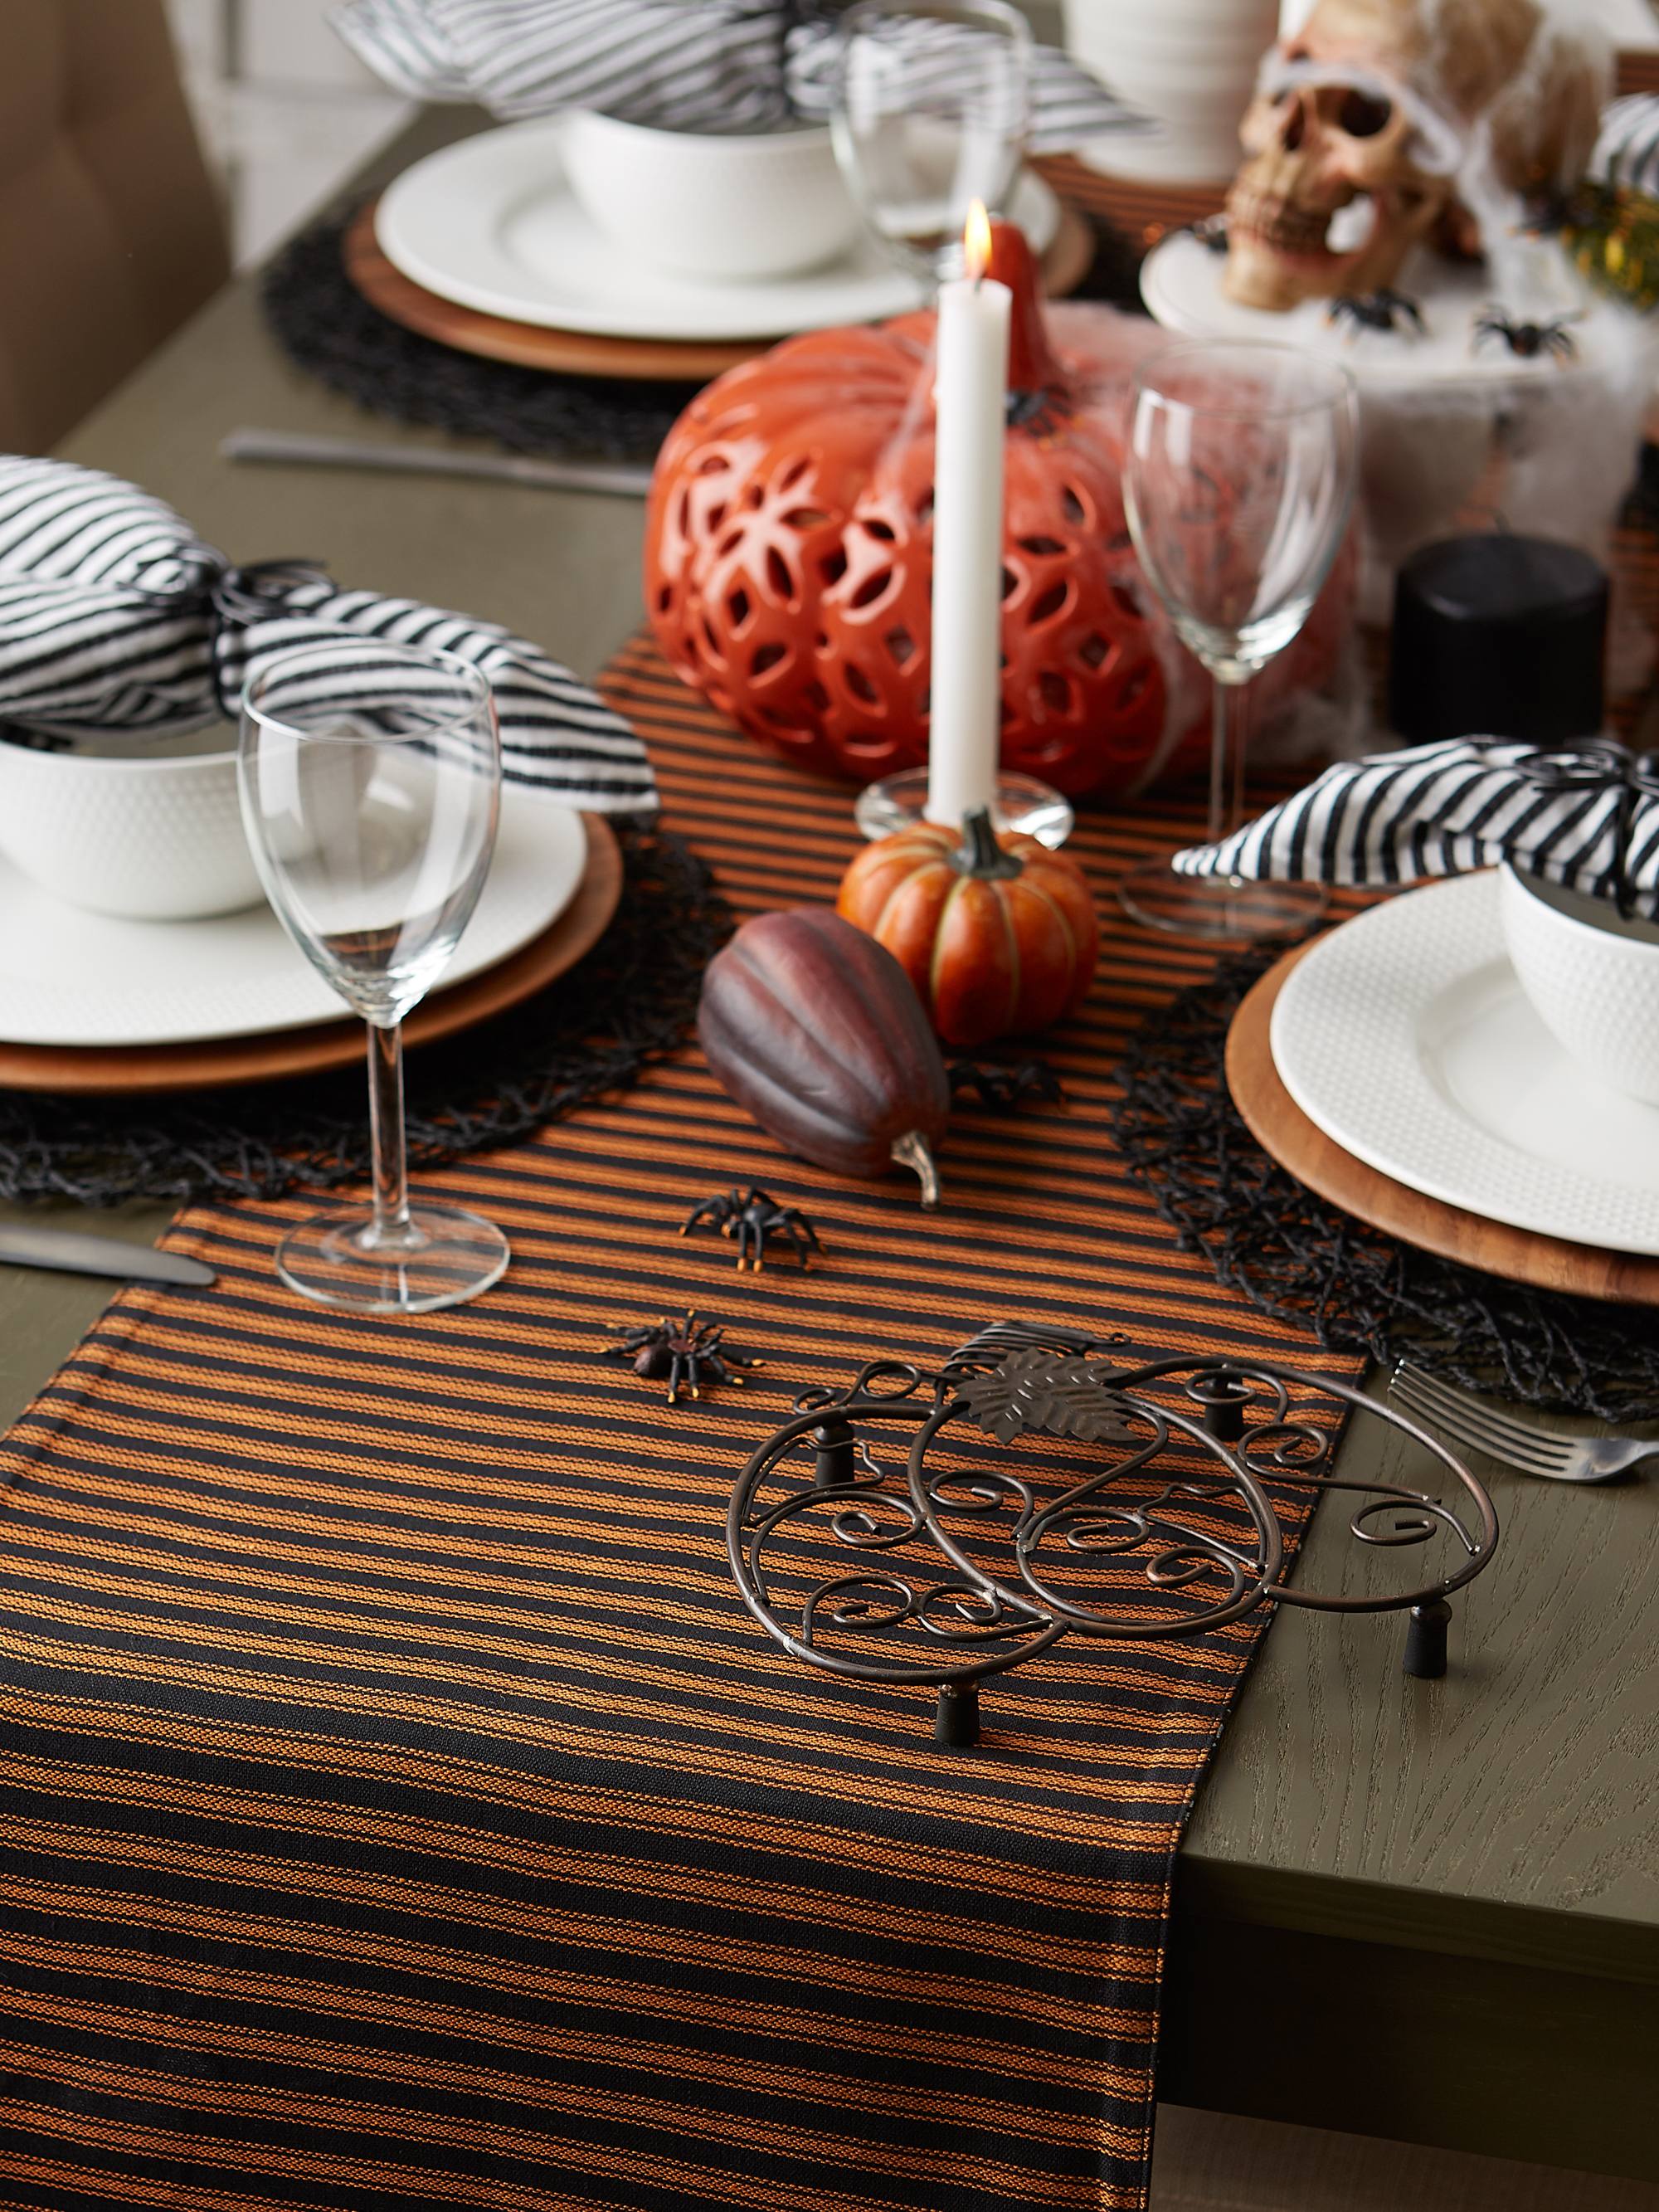 DII Halloween Happy Haunting Spooky Spider Reversible Table Runner 14x70"